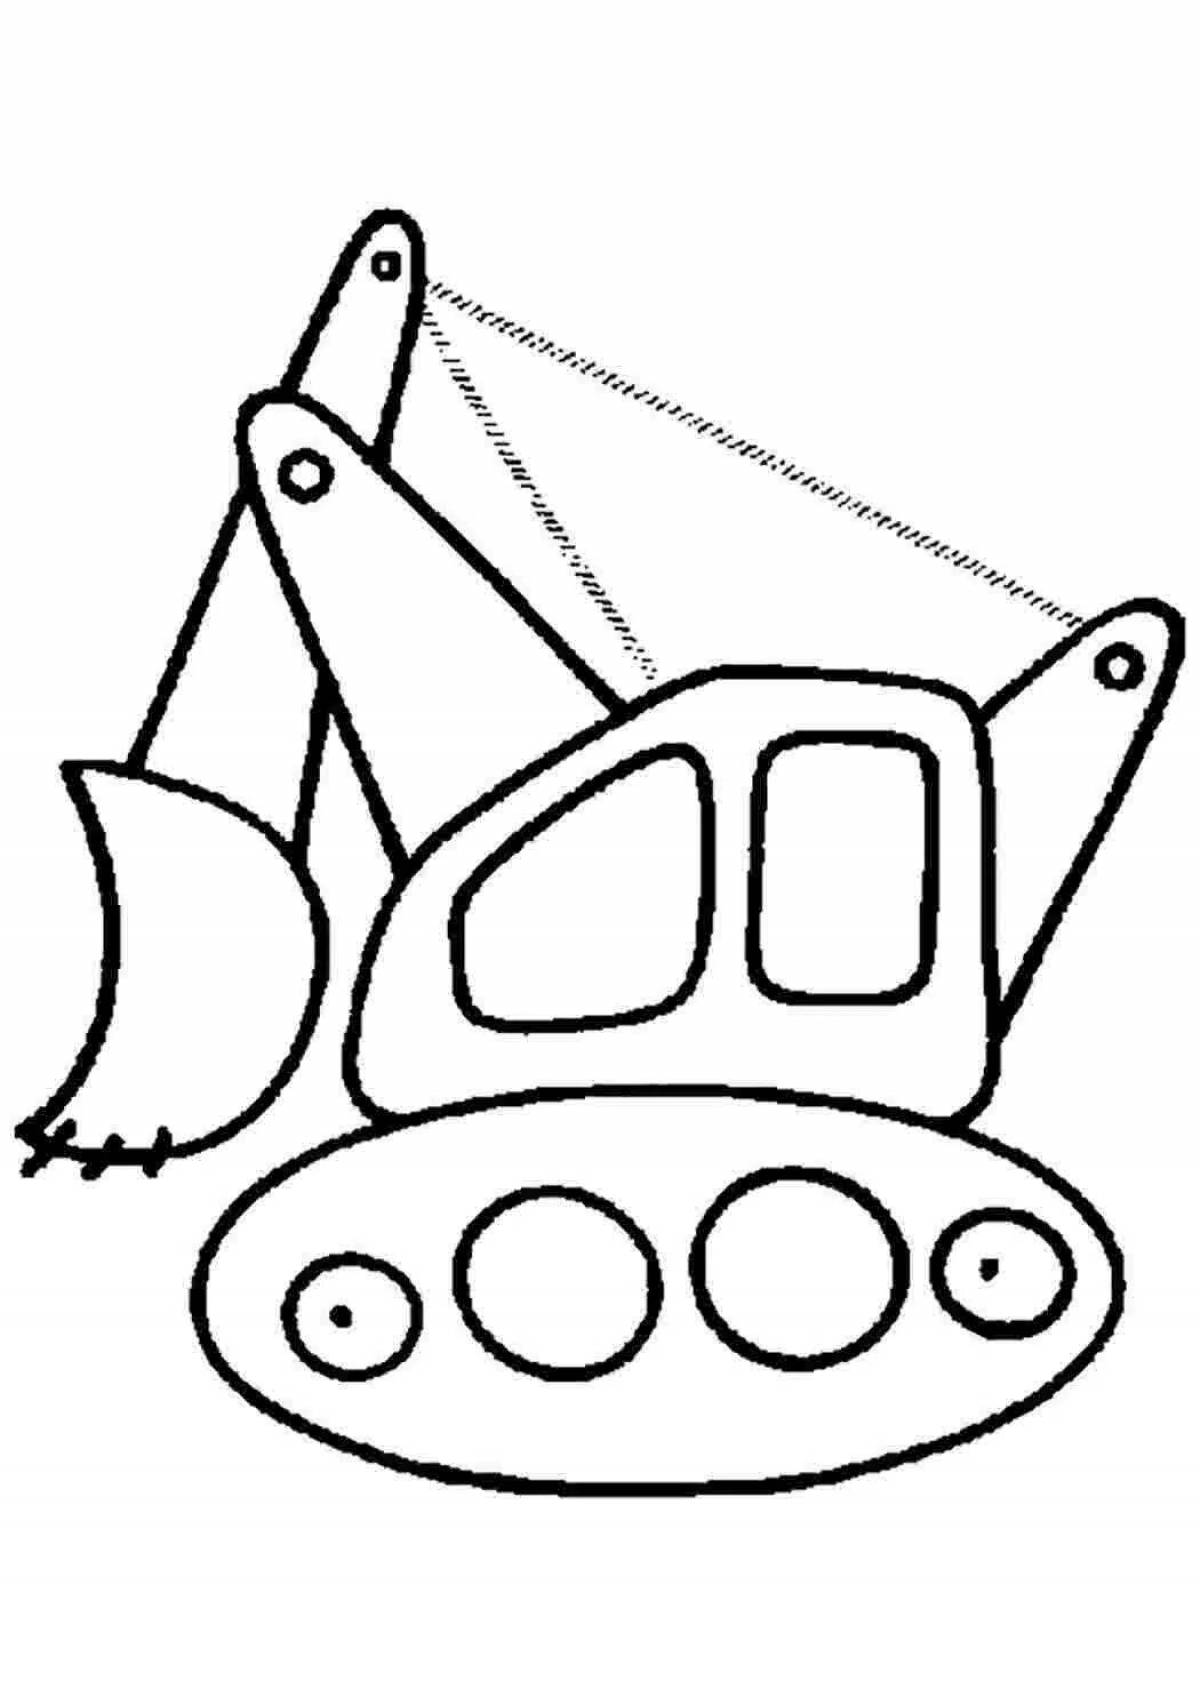 Impressive construction machinery coloring page for kids